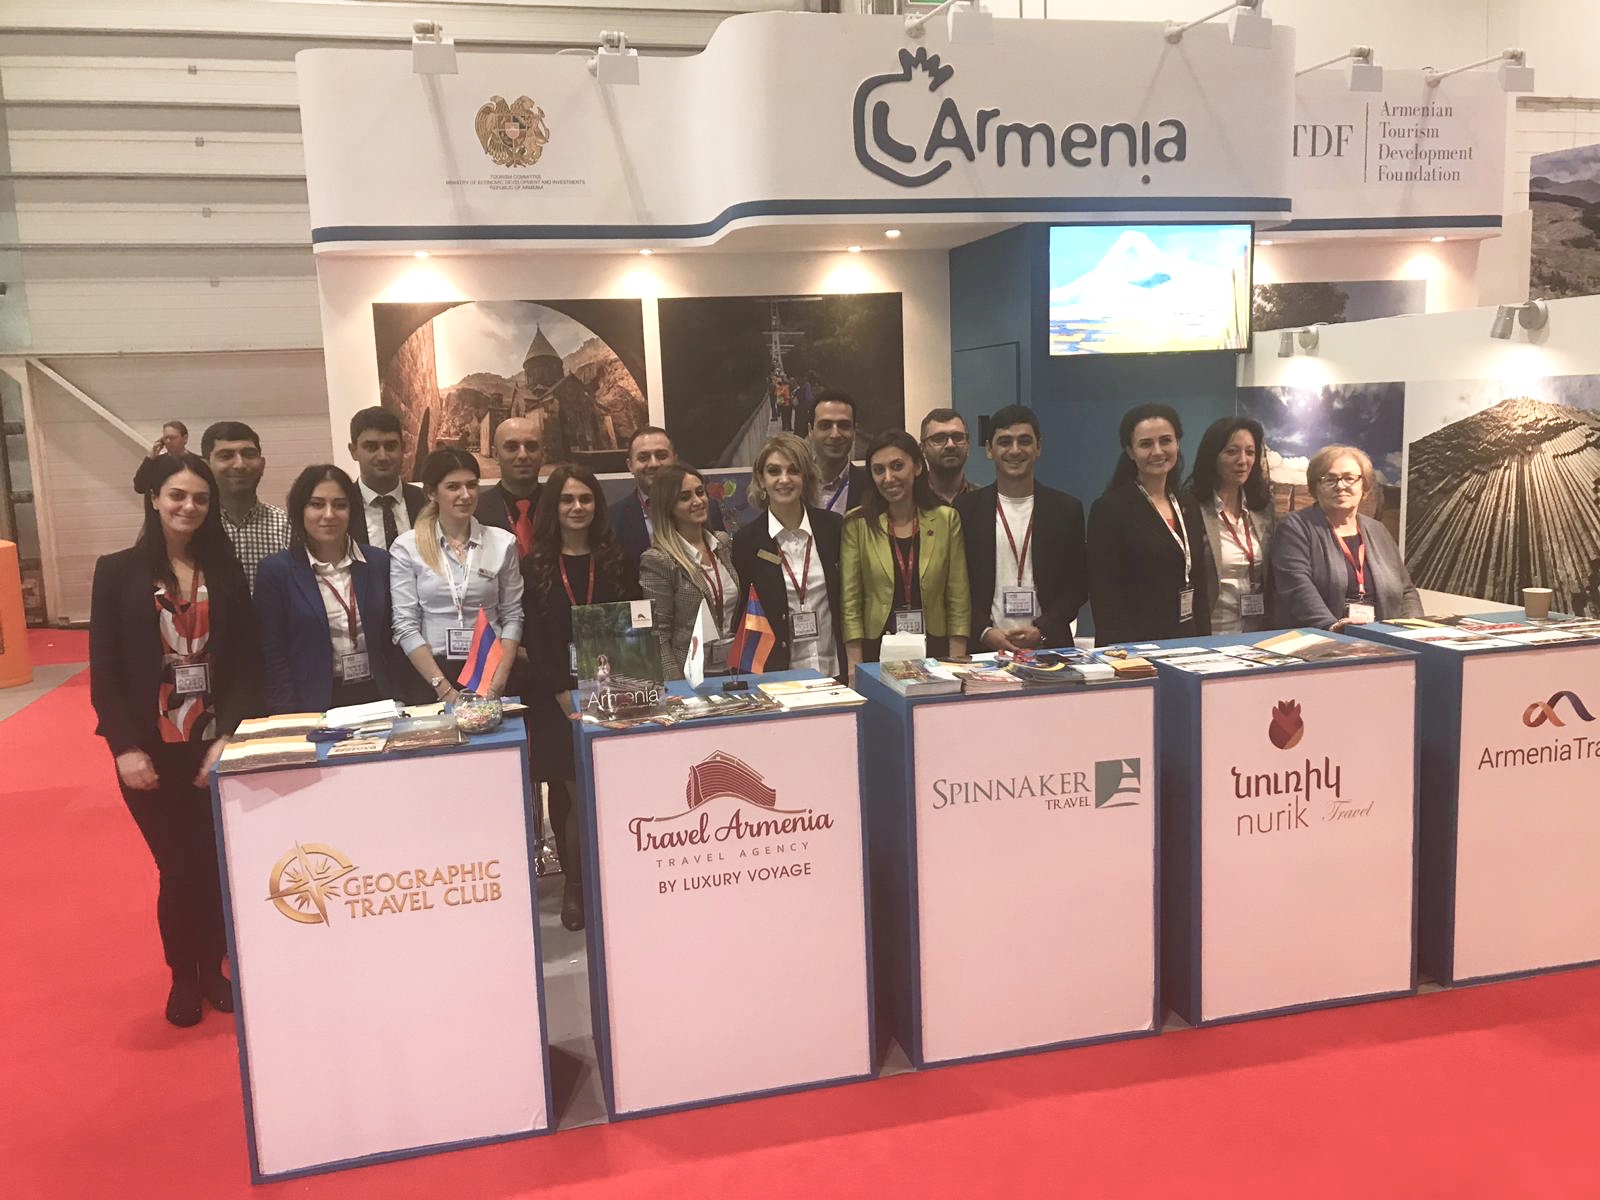 Armenia and Artsakh participated at the World Travel Market in London